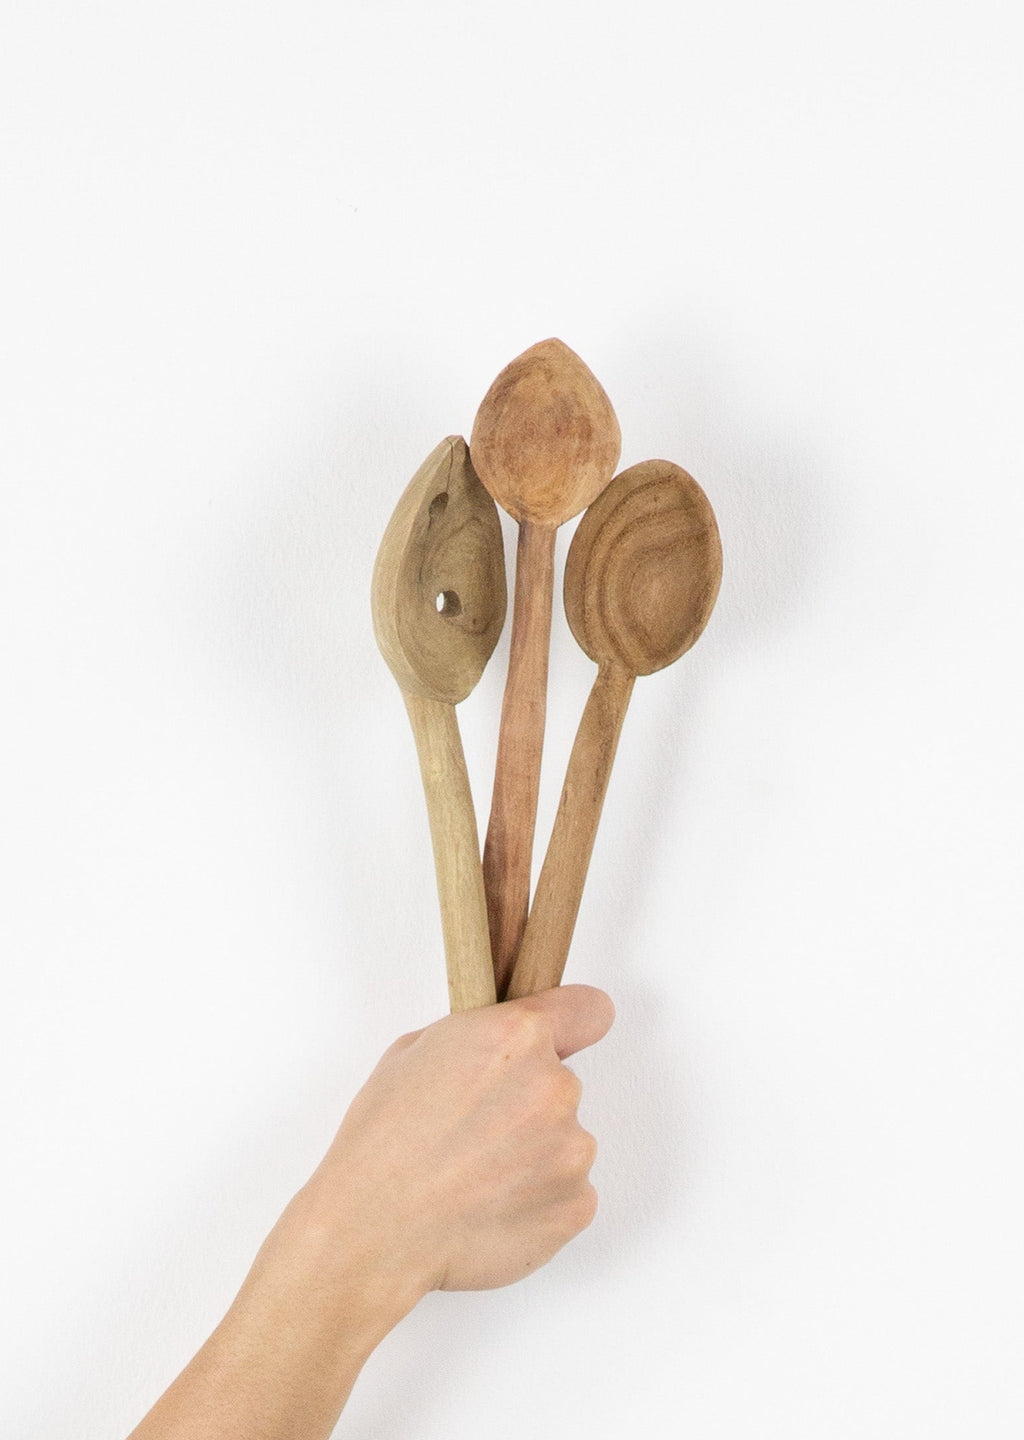 FOUND OBJECTS | Vintage Wooden Spoons